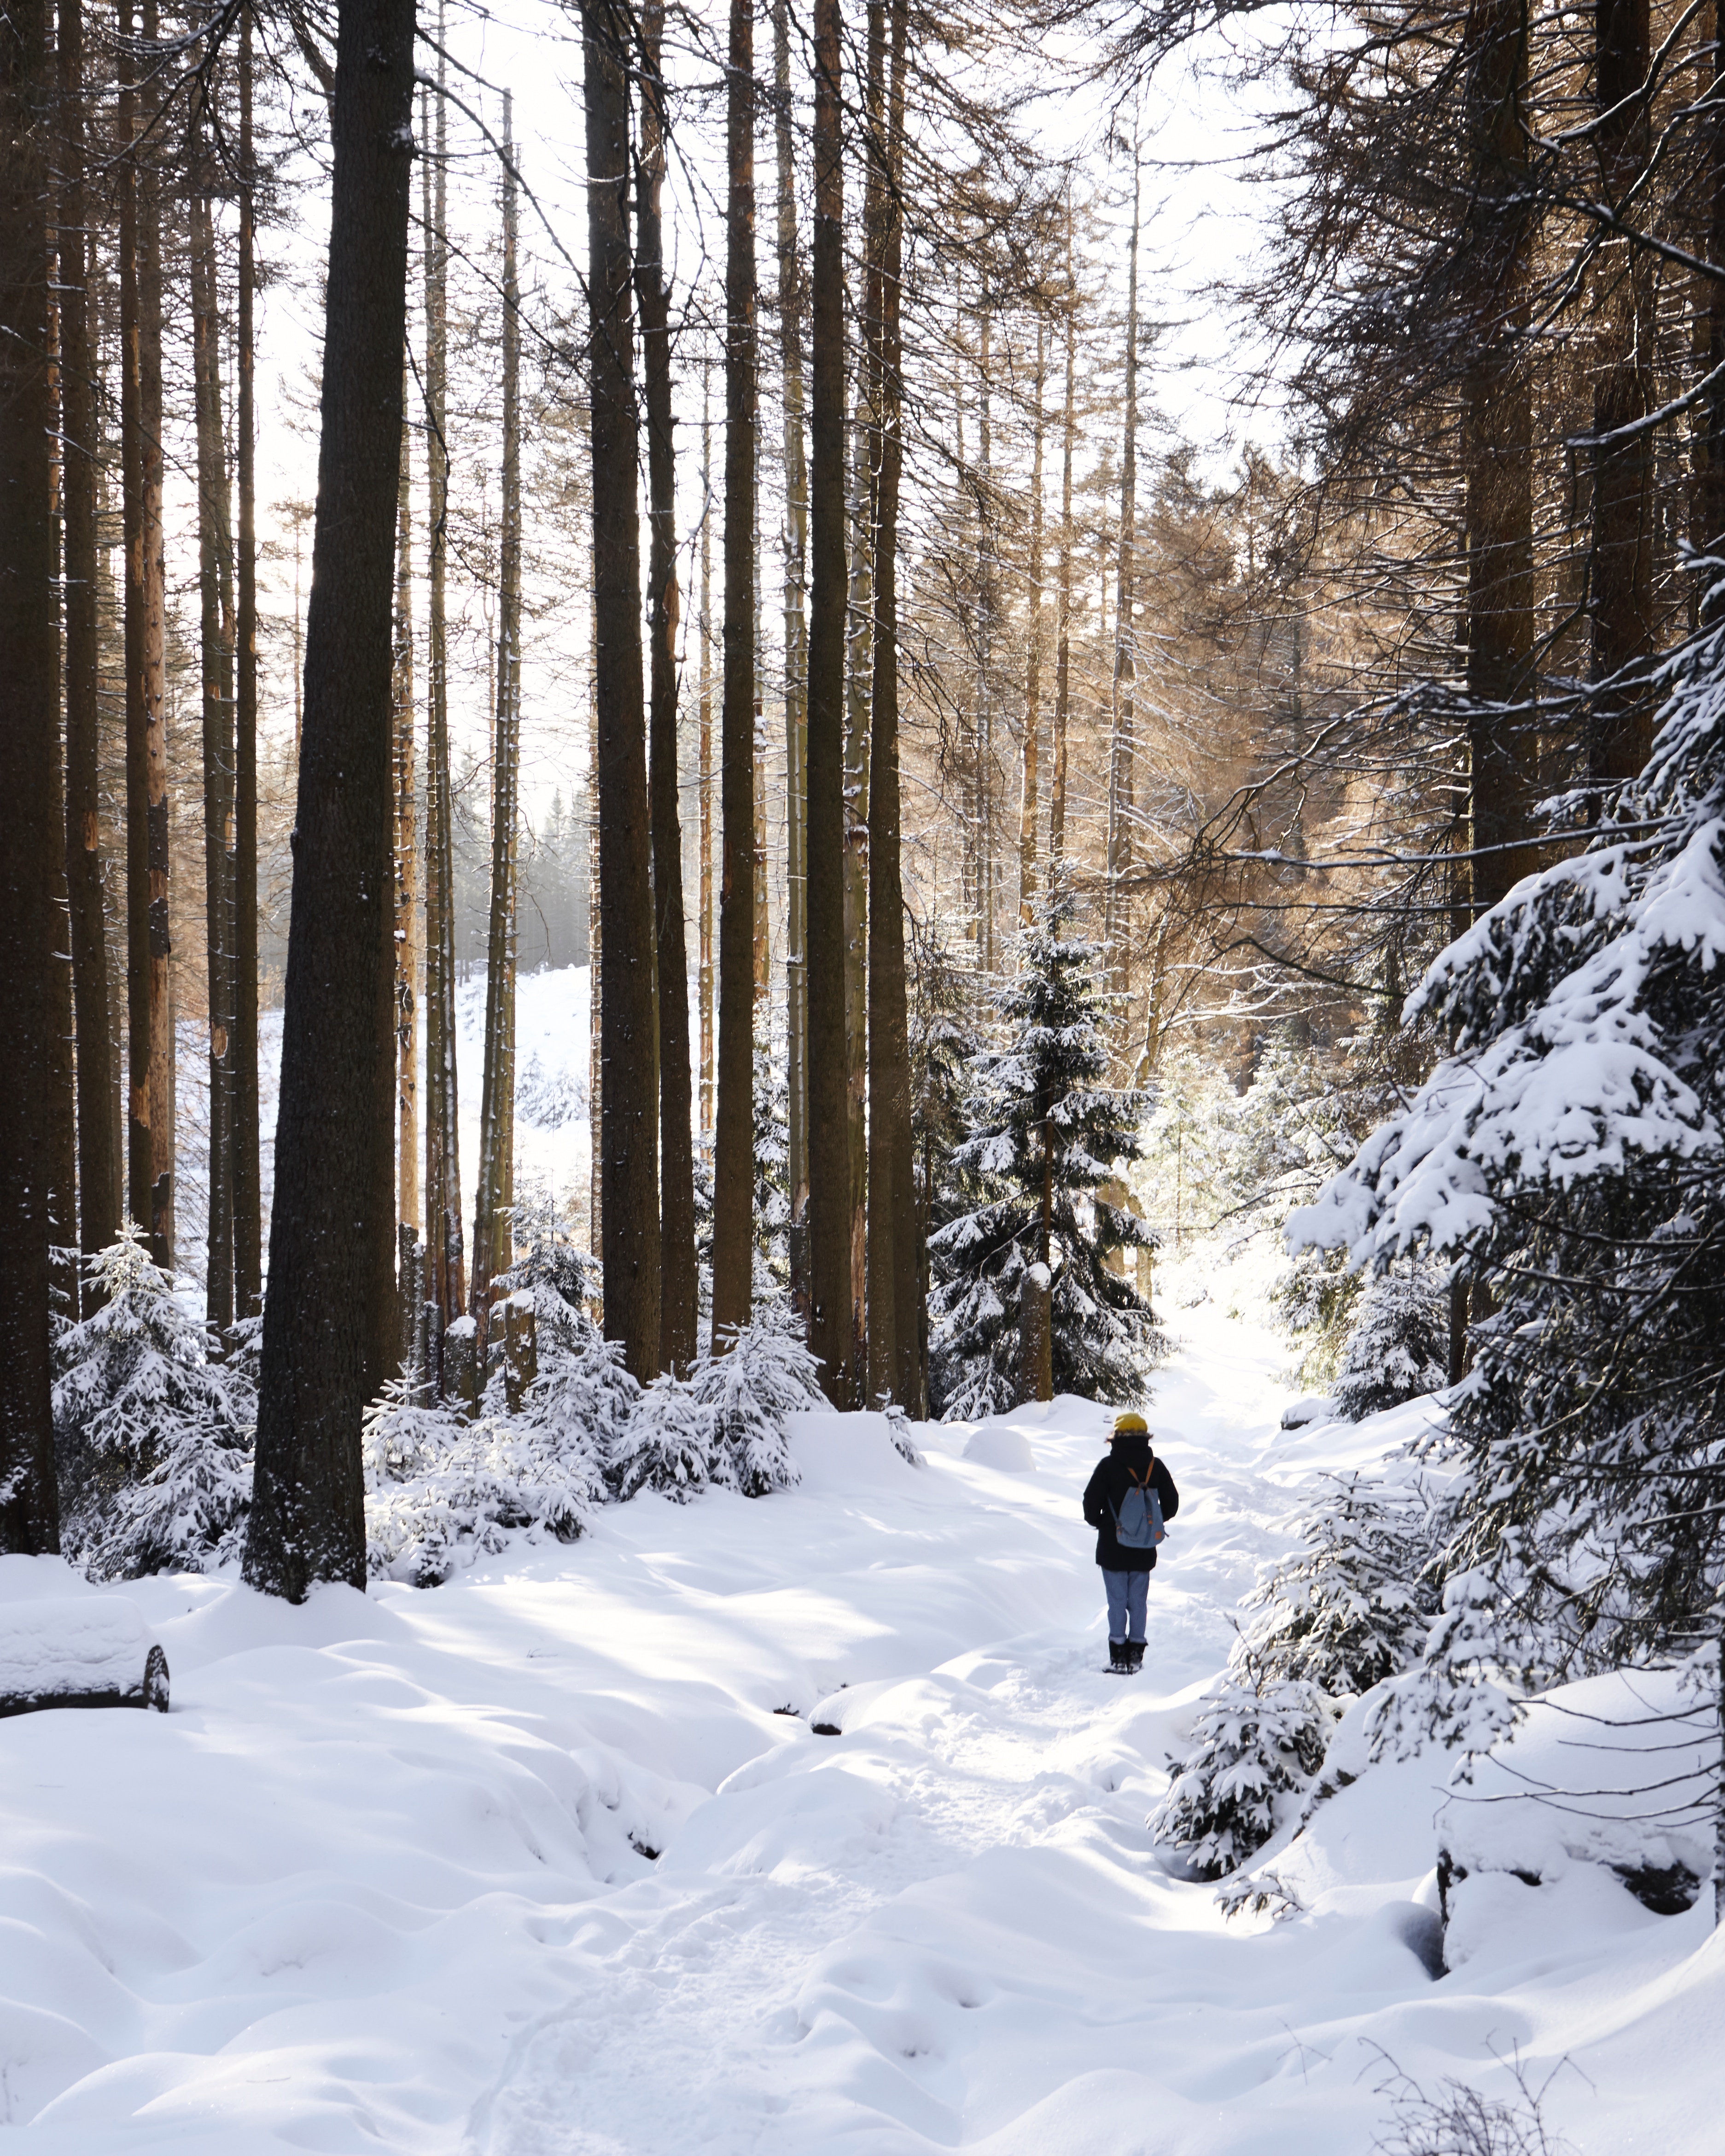 nature, forest, snow, winter, trees, privacy, seclusion, stroll